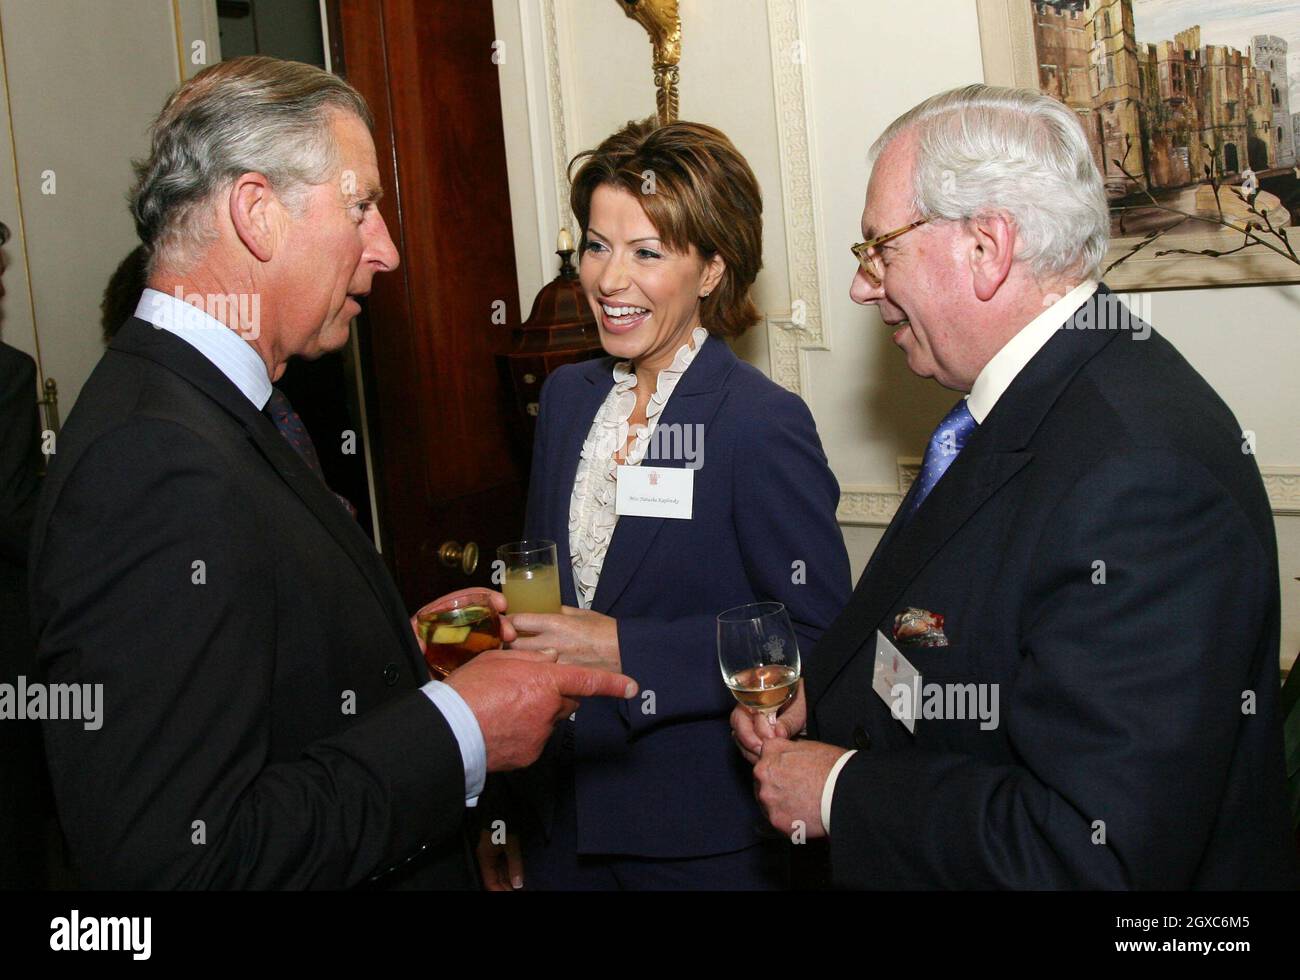 Prince Charles, Prince of Wales chats to Natasha Kaplinsky and David Starkey during a reception for the Royal Television Society at Clarence House in London on May 22, 2007. Stock Photo